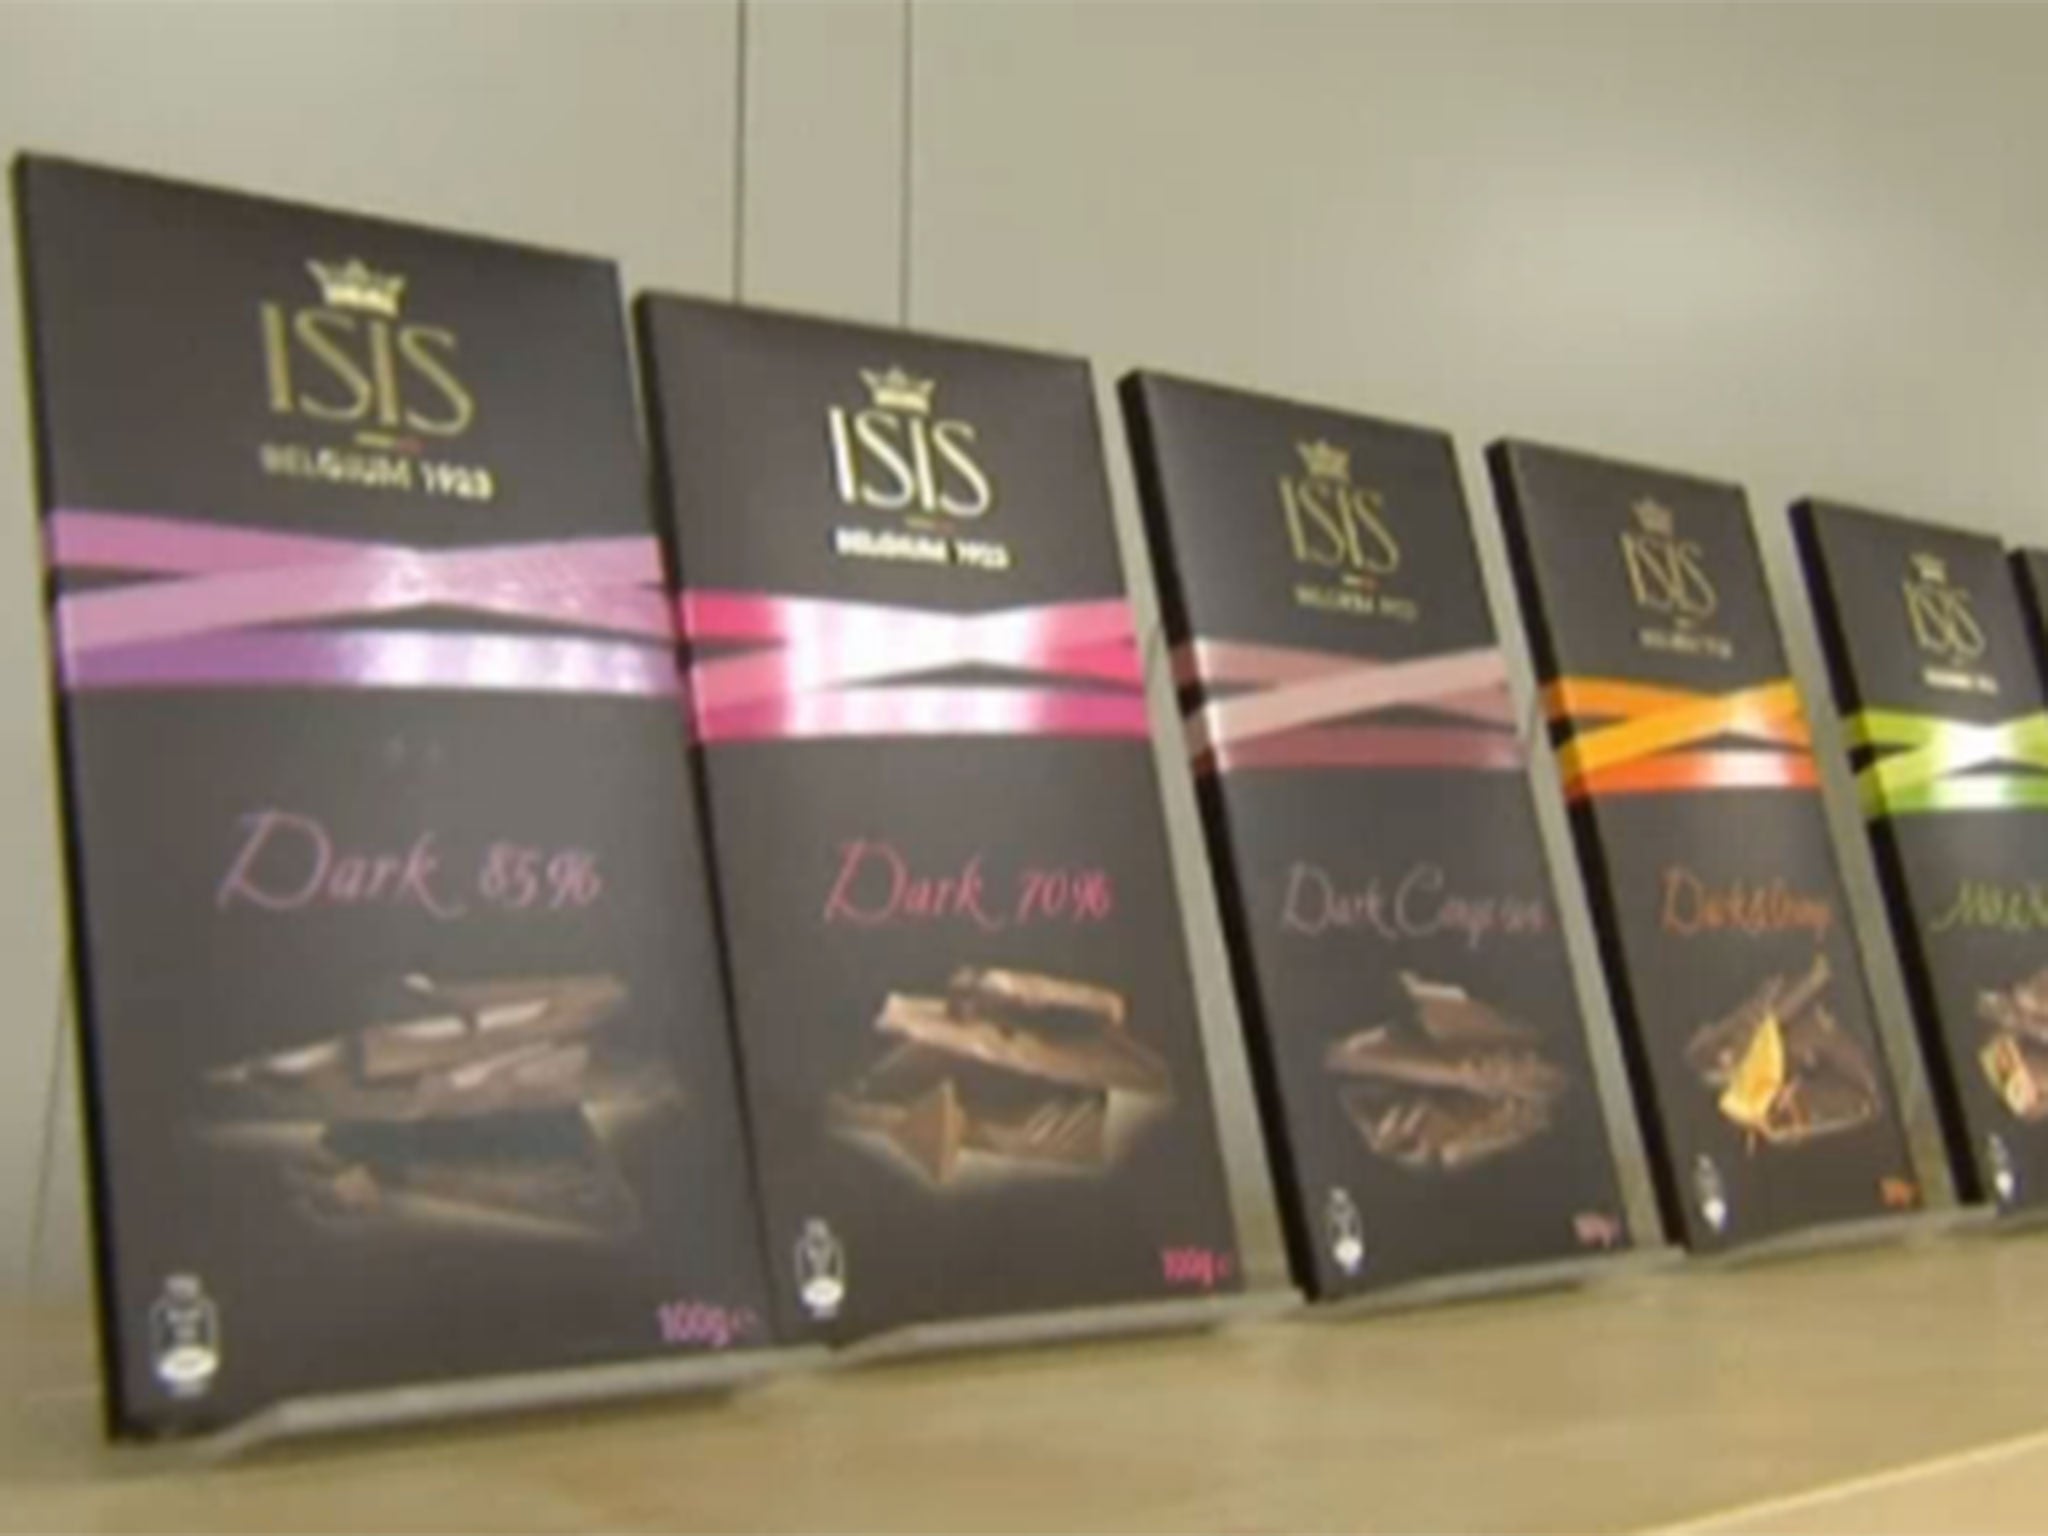 Belgium chocolate maker ISIS changes its name after drop in sales.